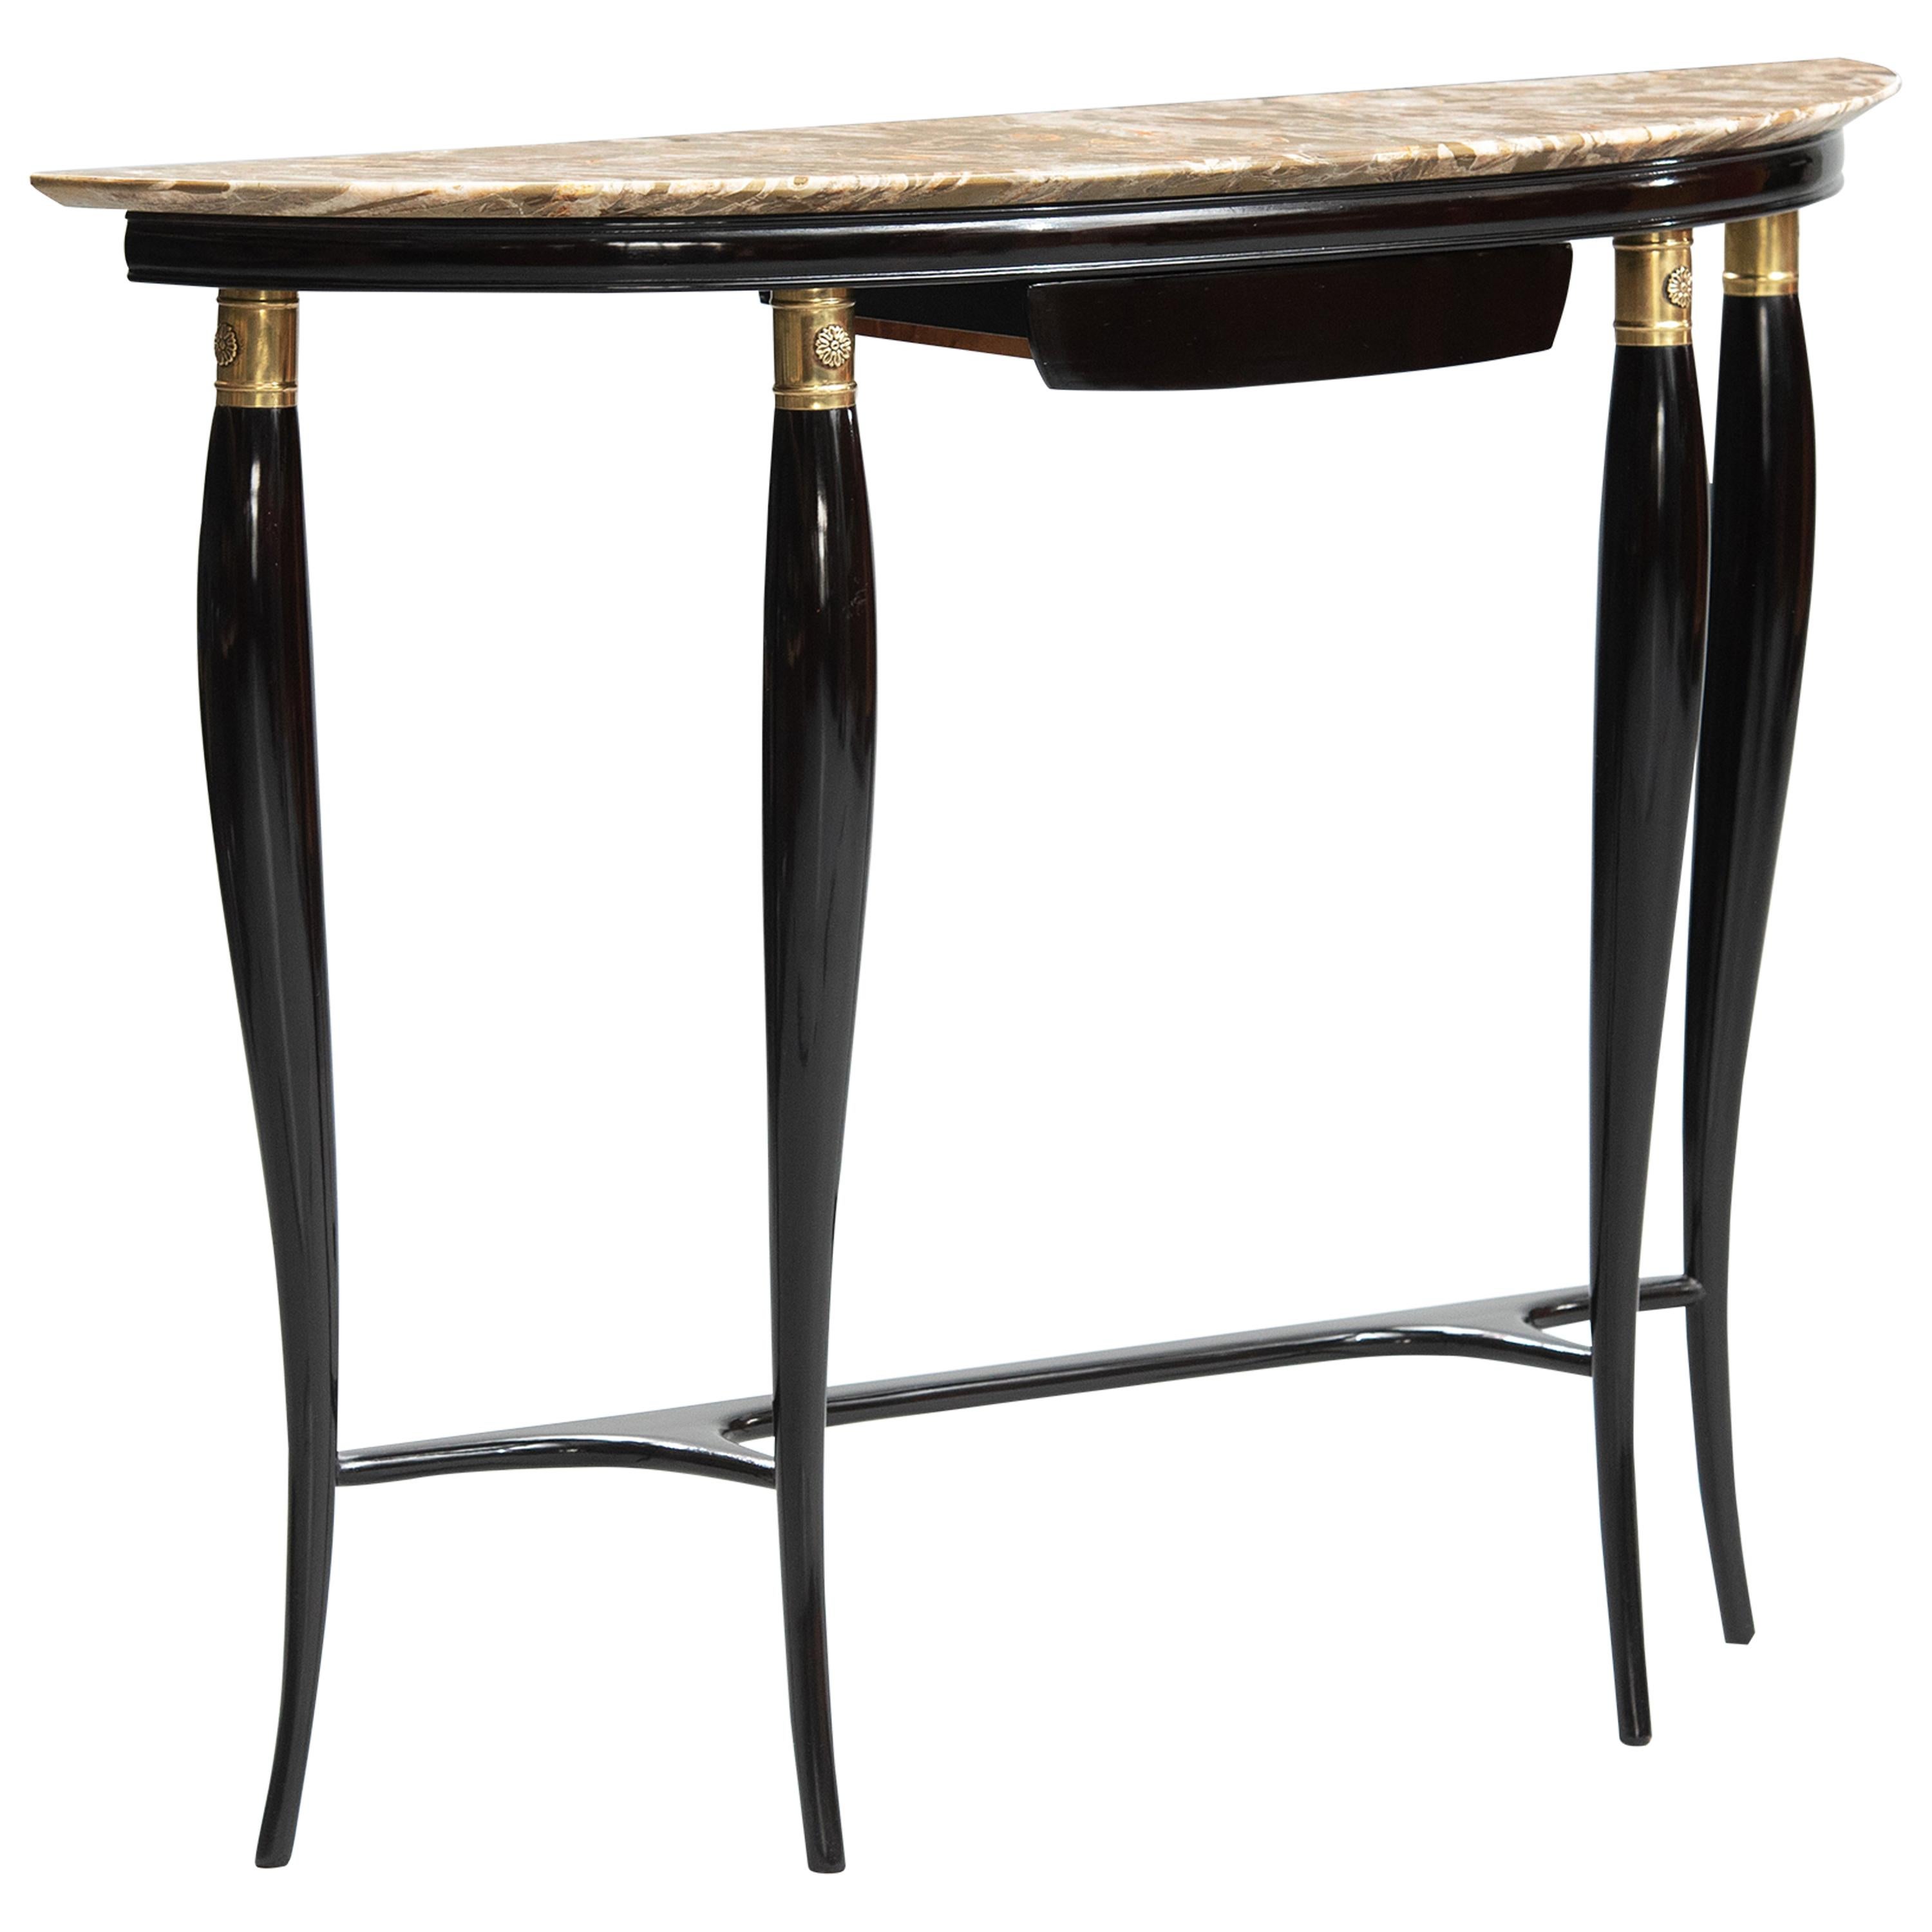 Mid-Century Modern Marble-Top Console attributed to Paolo Buffa, circa 1948